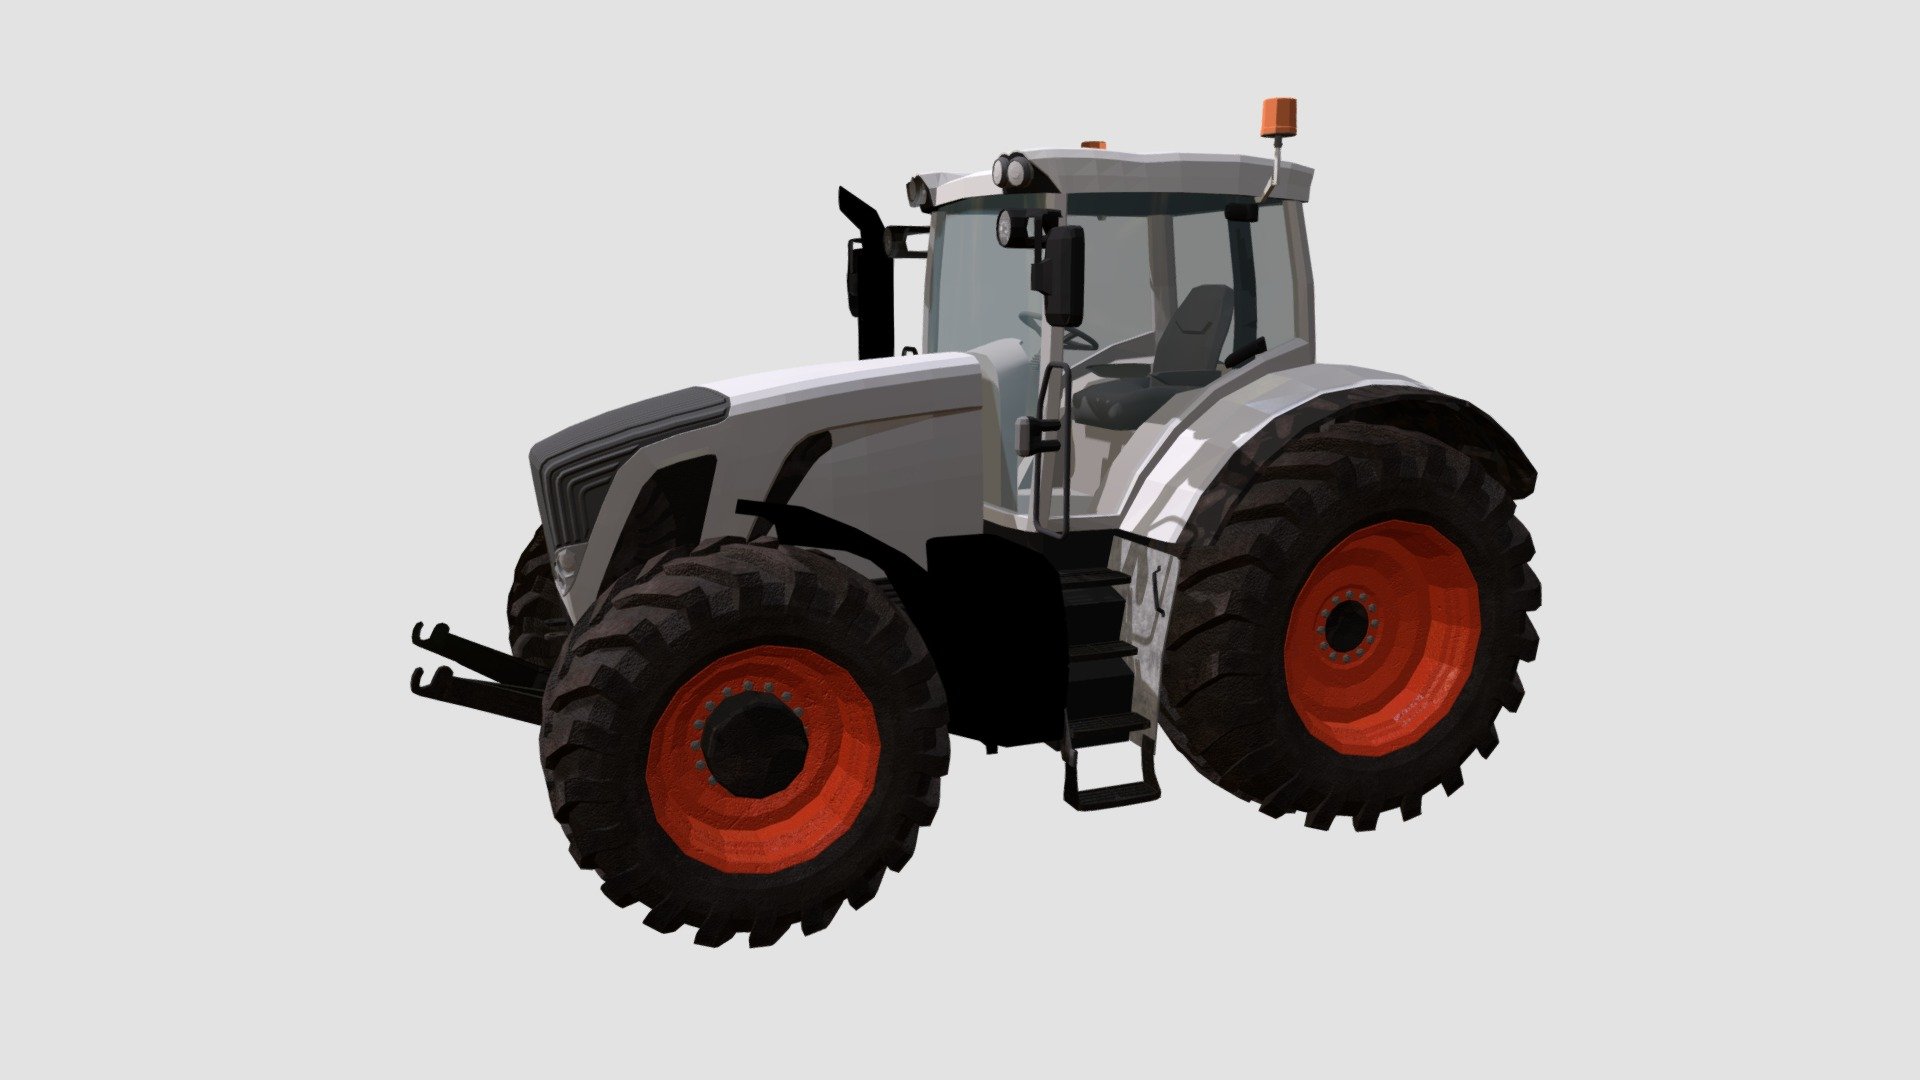 Highly detailed 3d model of tractor with textures, shaders and materials. It is ready to use, just put it into your scene 3d model